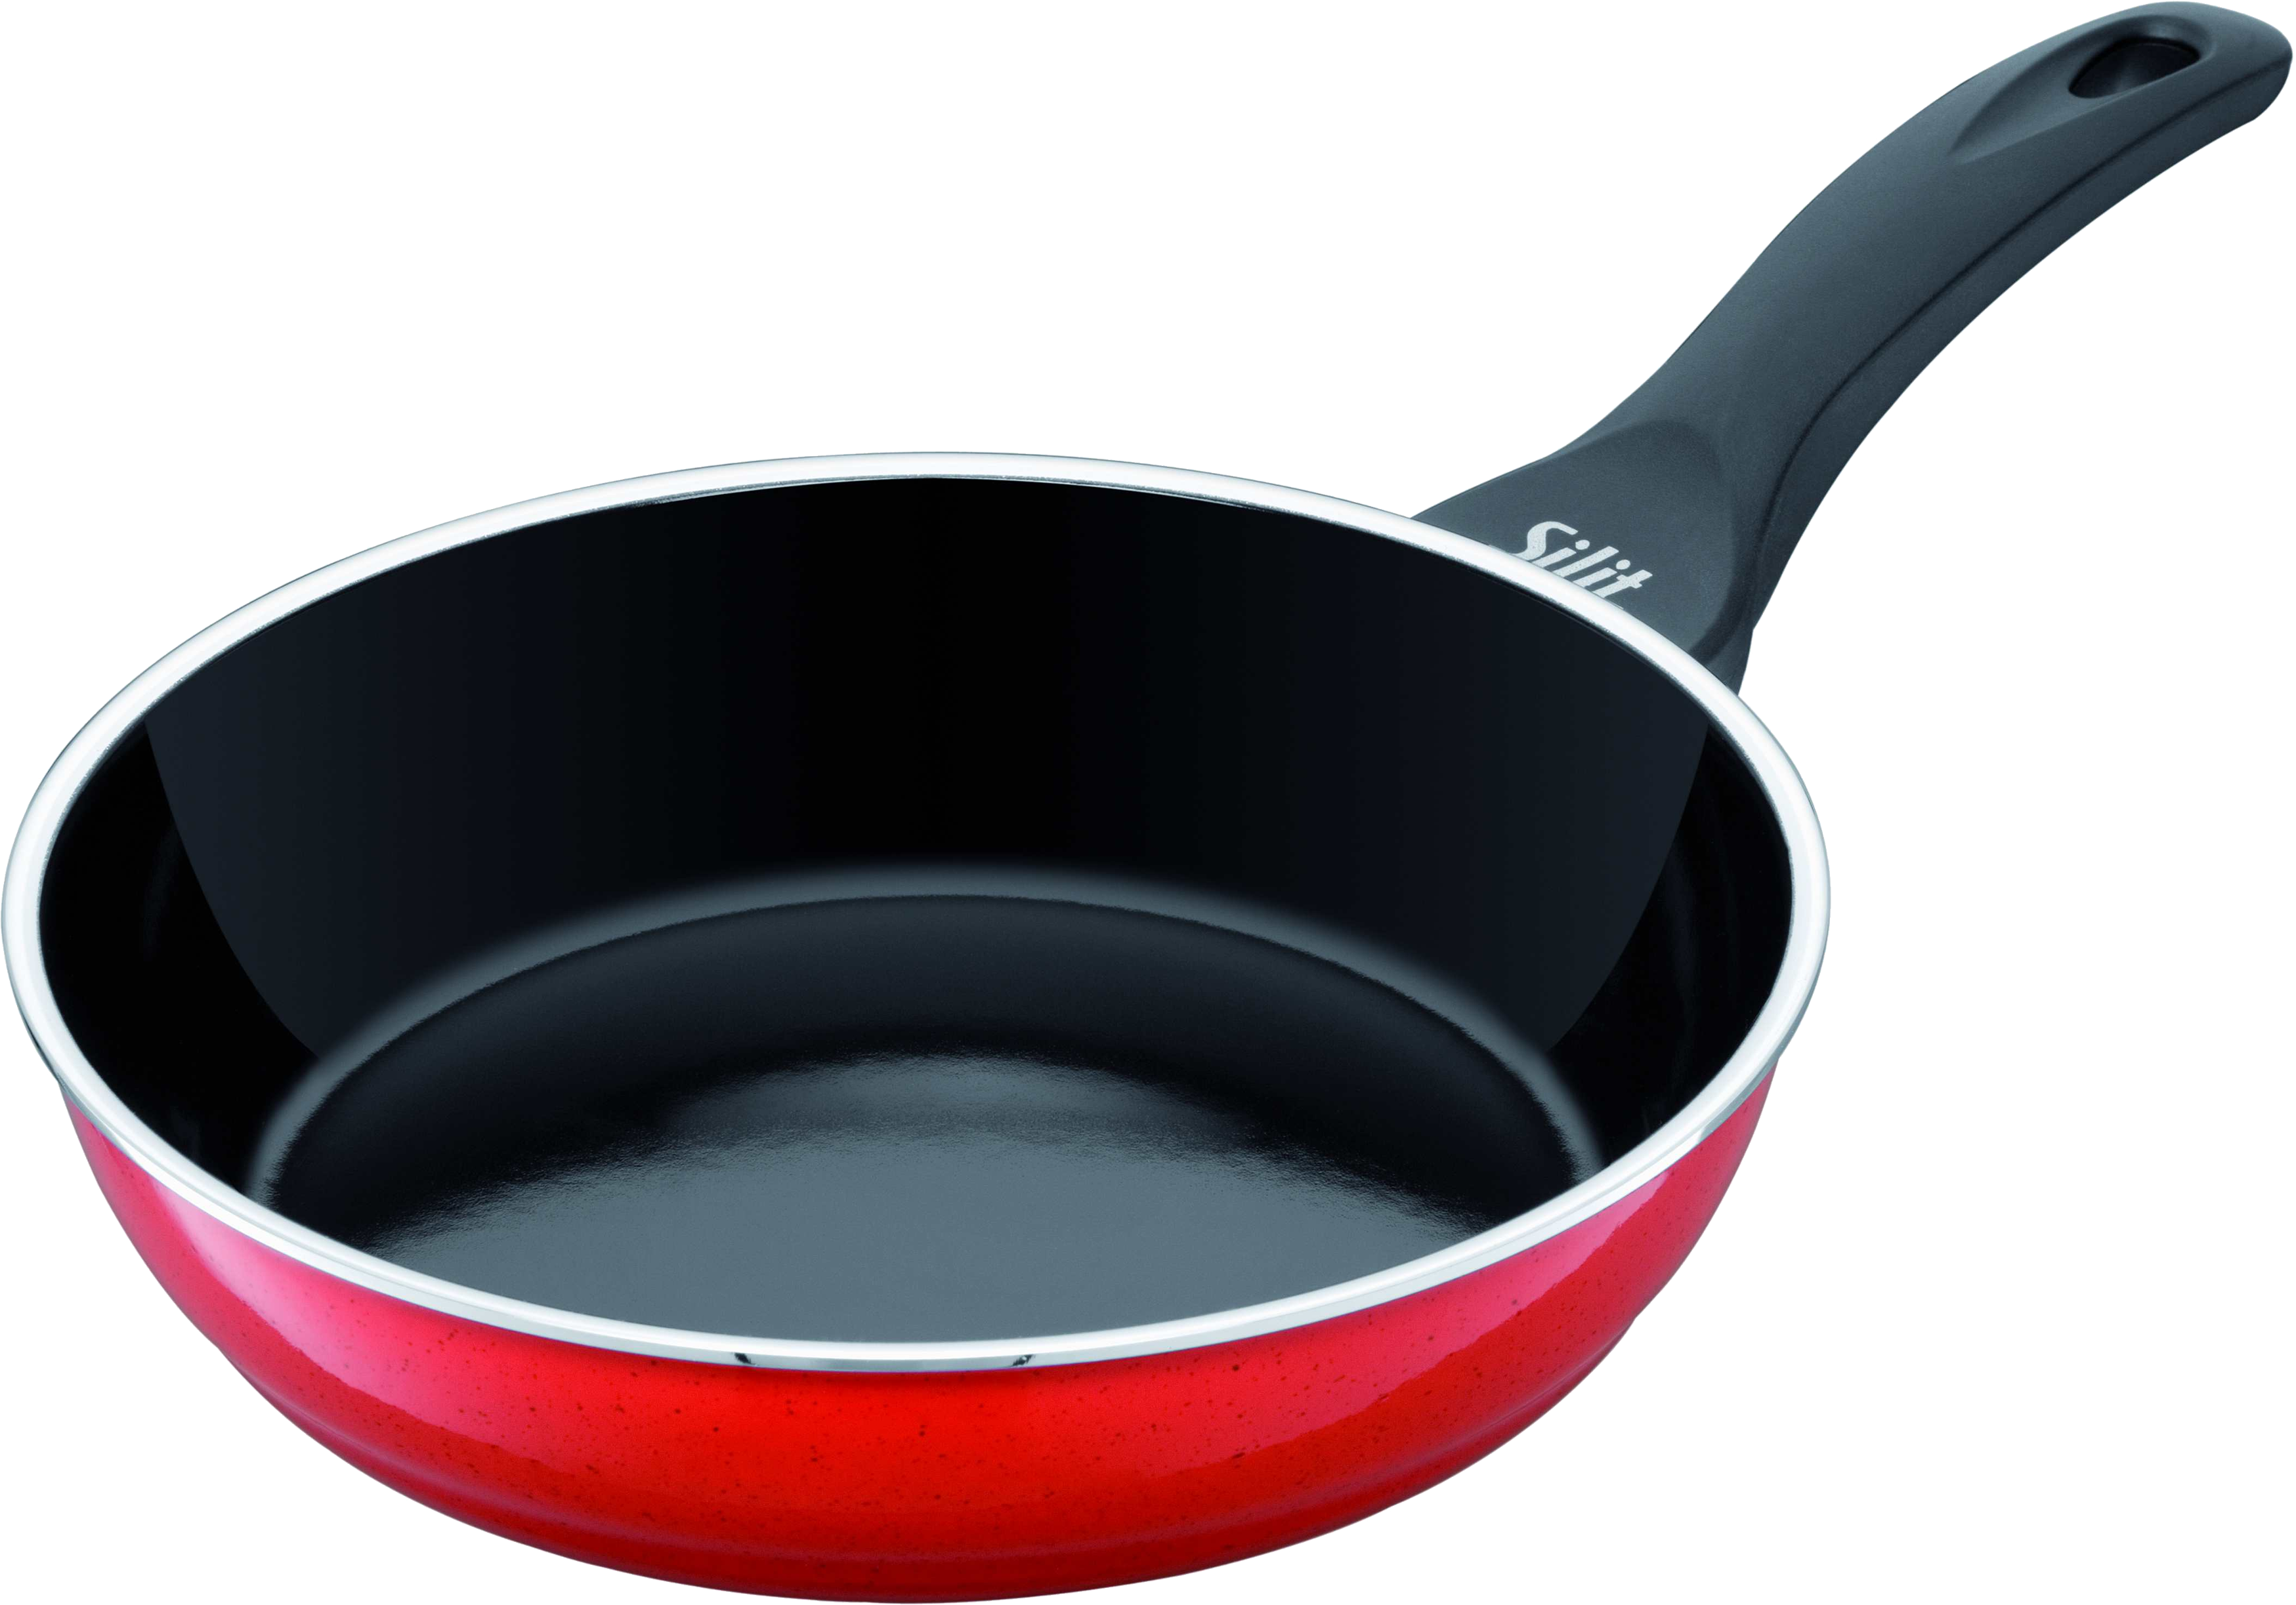 Red Frying Pan PNG HD Images pngteam.com